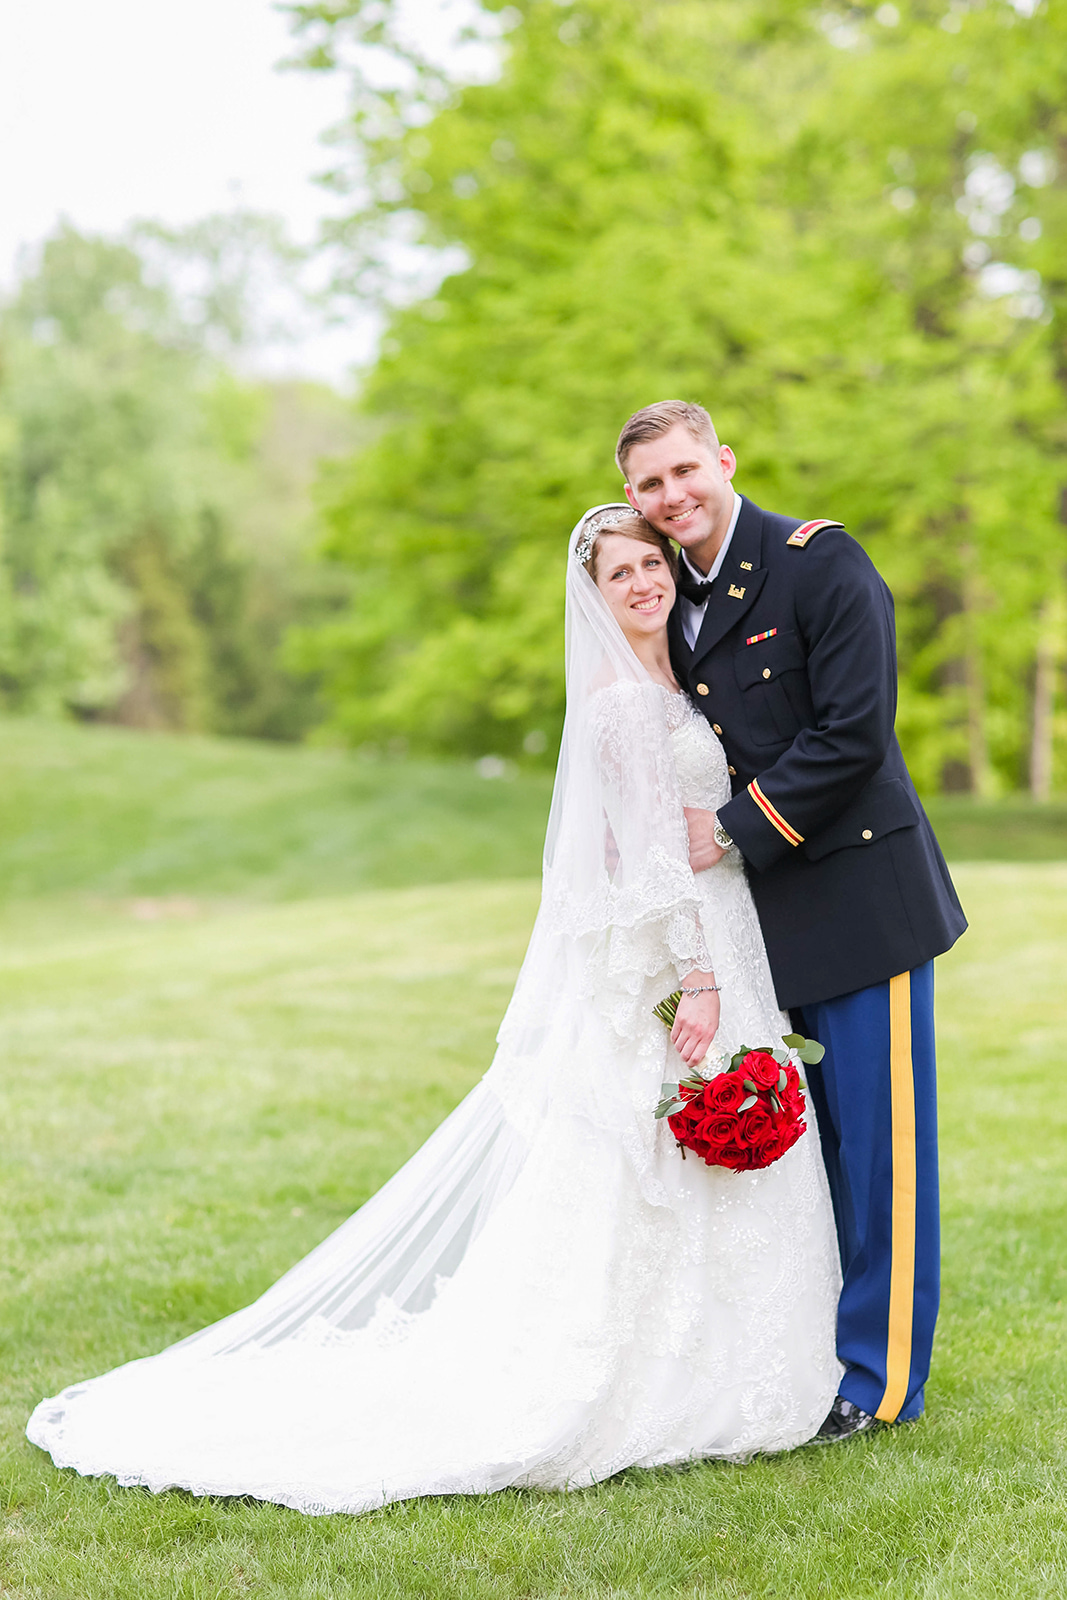 A Classic Indianapolis Military Wedding - Cathedral Wedding - The Overwhelmed Bride Wedding Blog